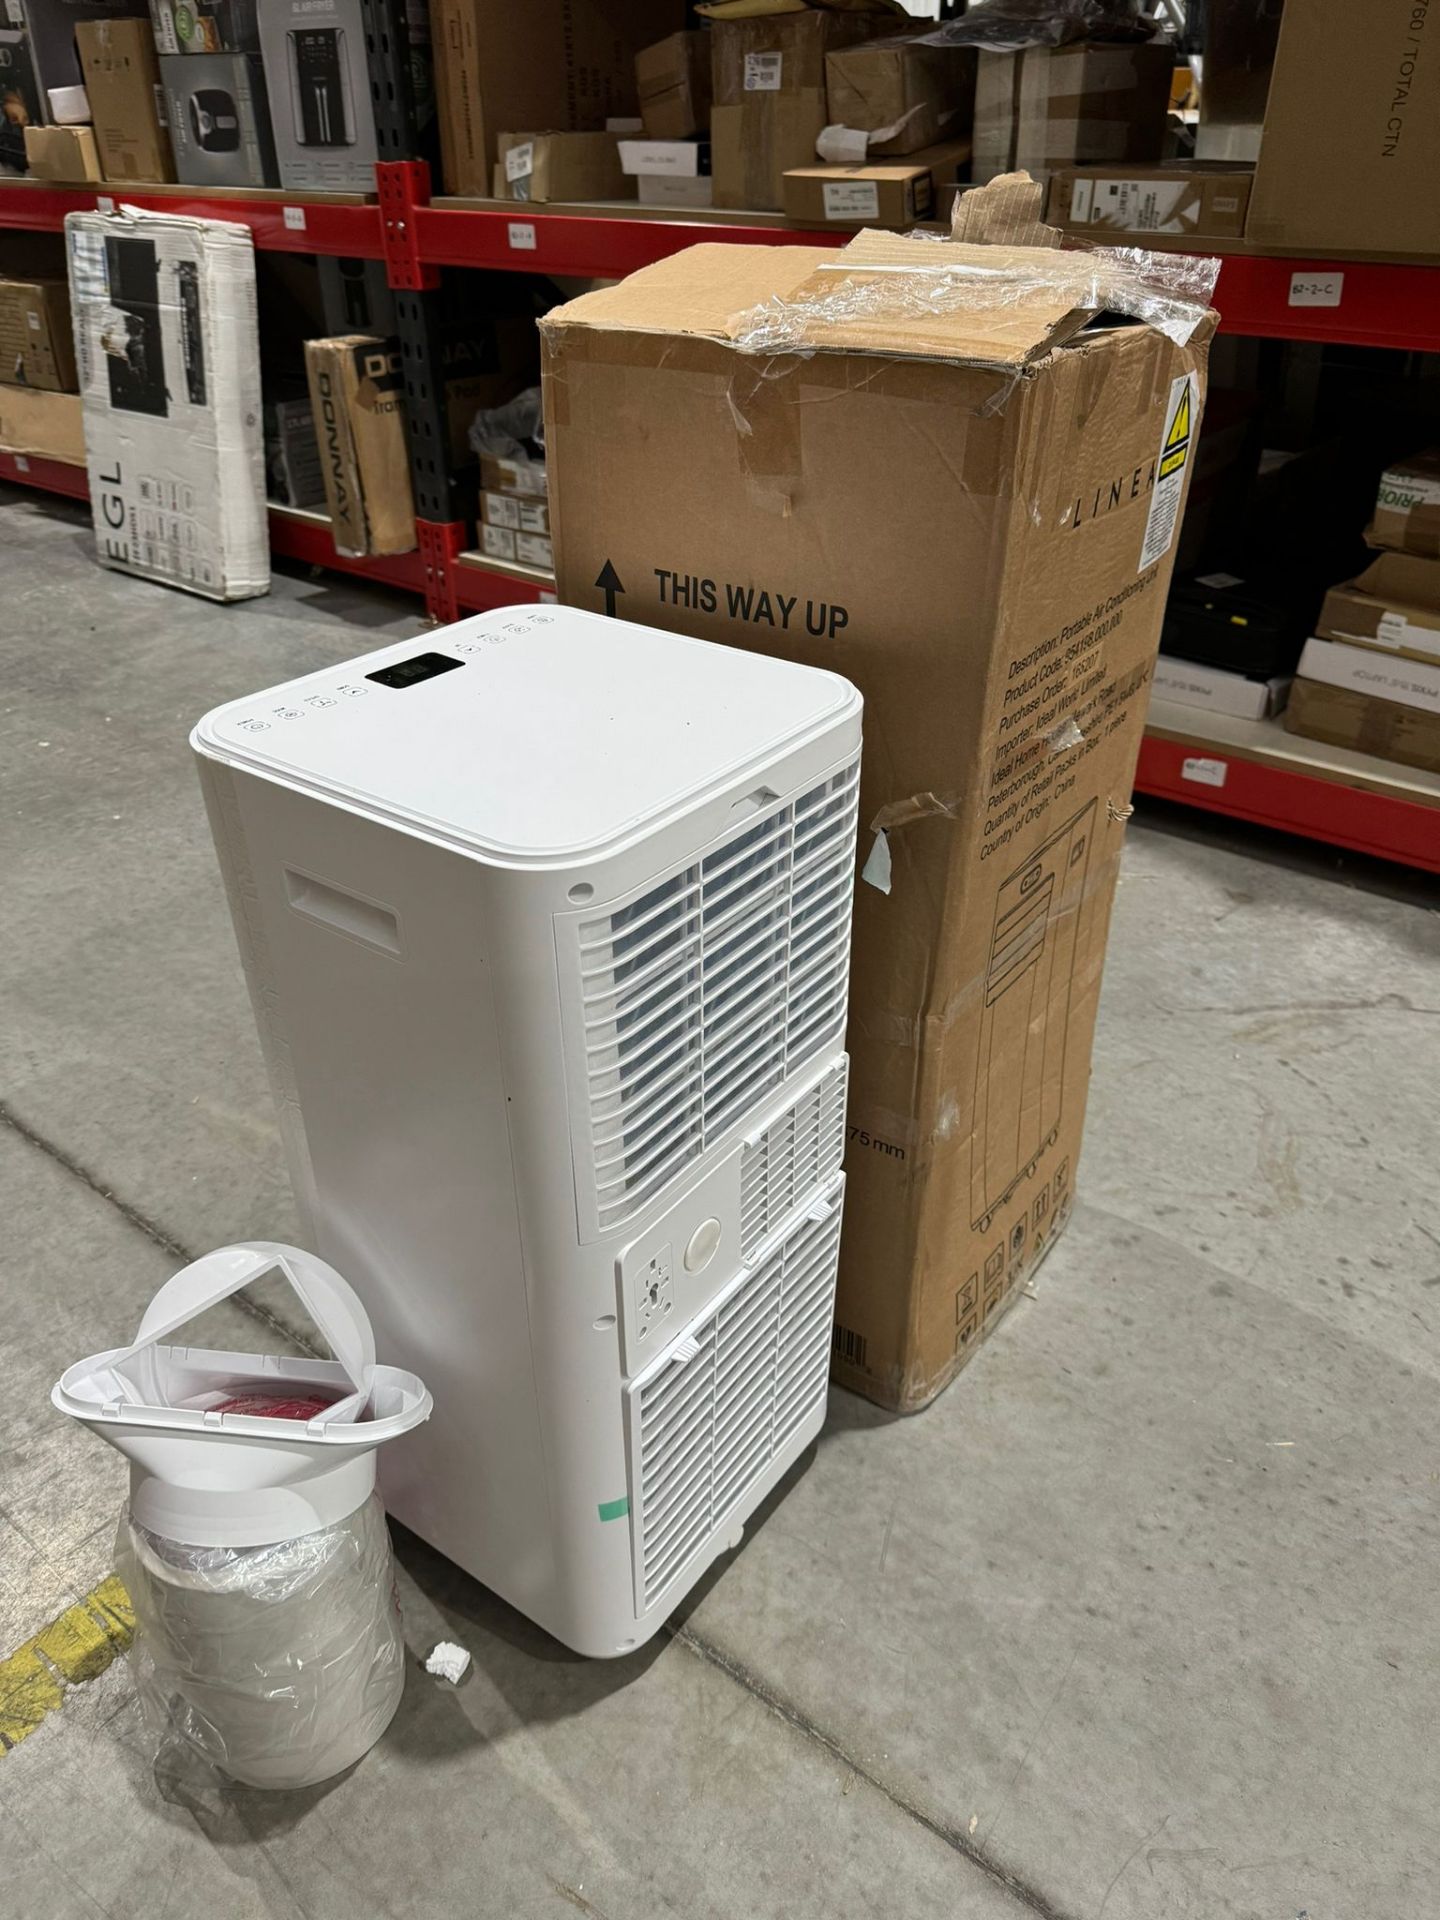 1 x LINEA Portable Air Conditioning Unit - 954198.000.000 with Window Kit - NO RESERVE - Image 4 of 8